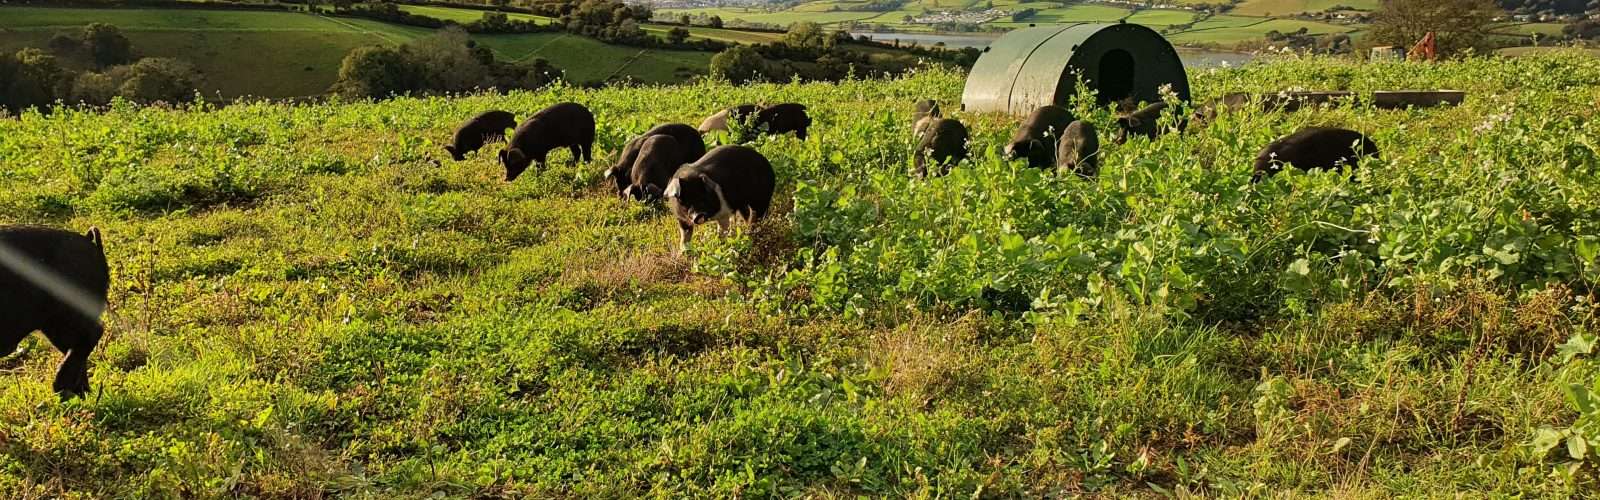 Deane Valley pasture reared pigs